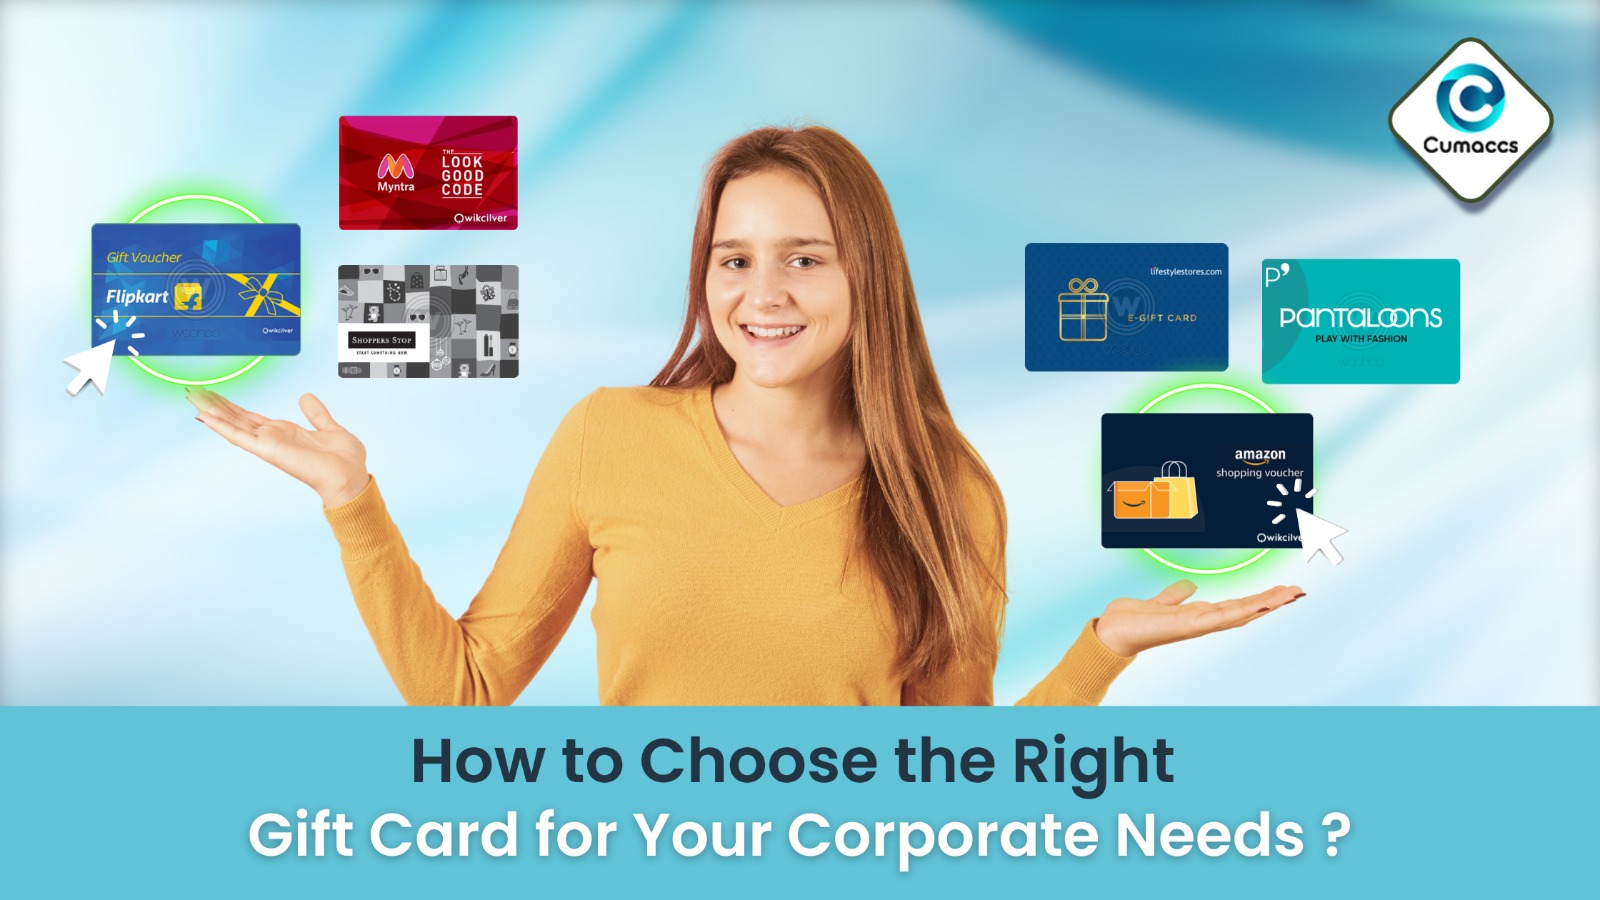 How to Choose the Right Gift Card for Your Corporate Needs?